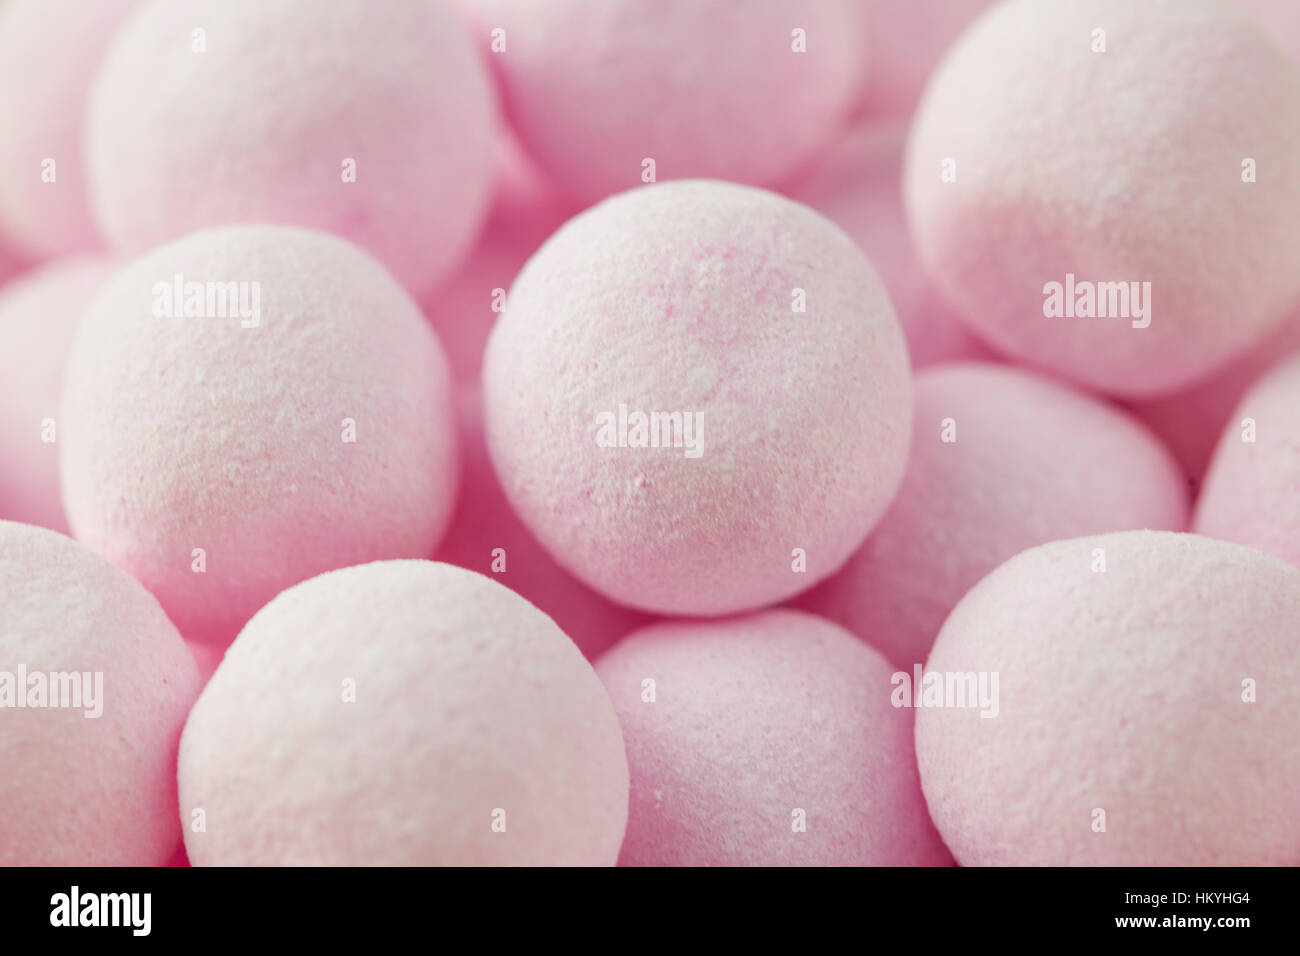 Pink bon bons candy sweets Stock Photo